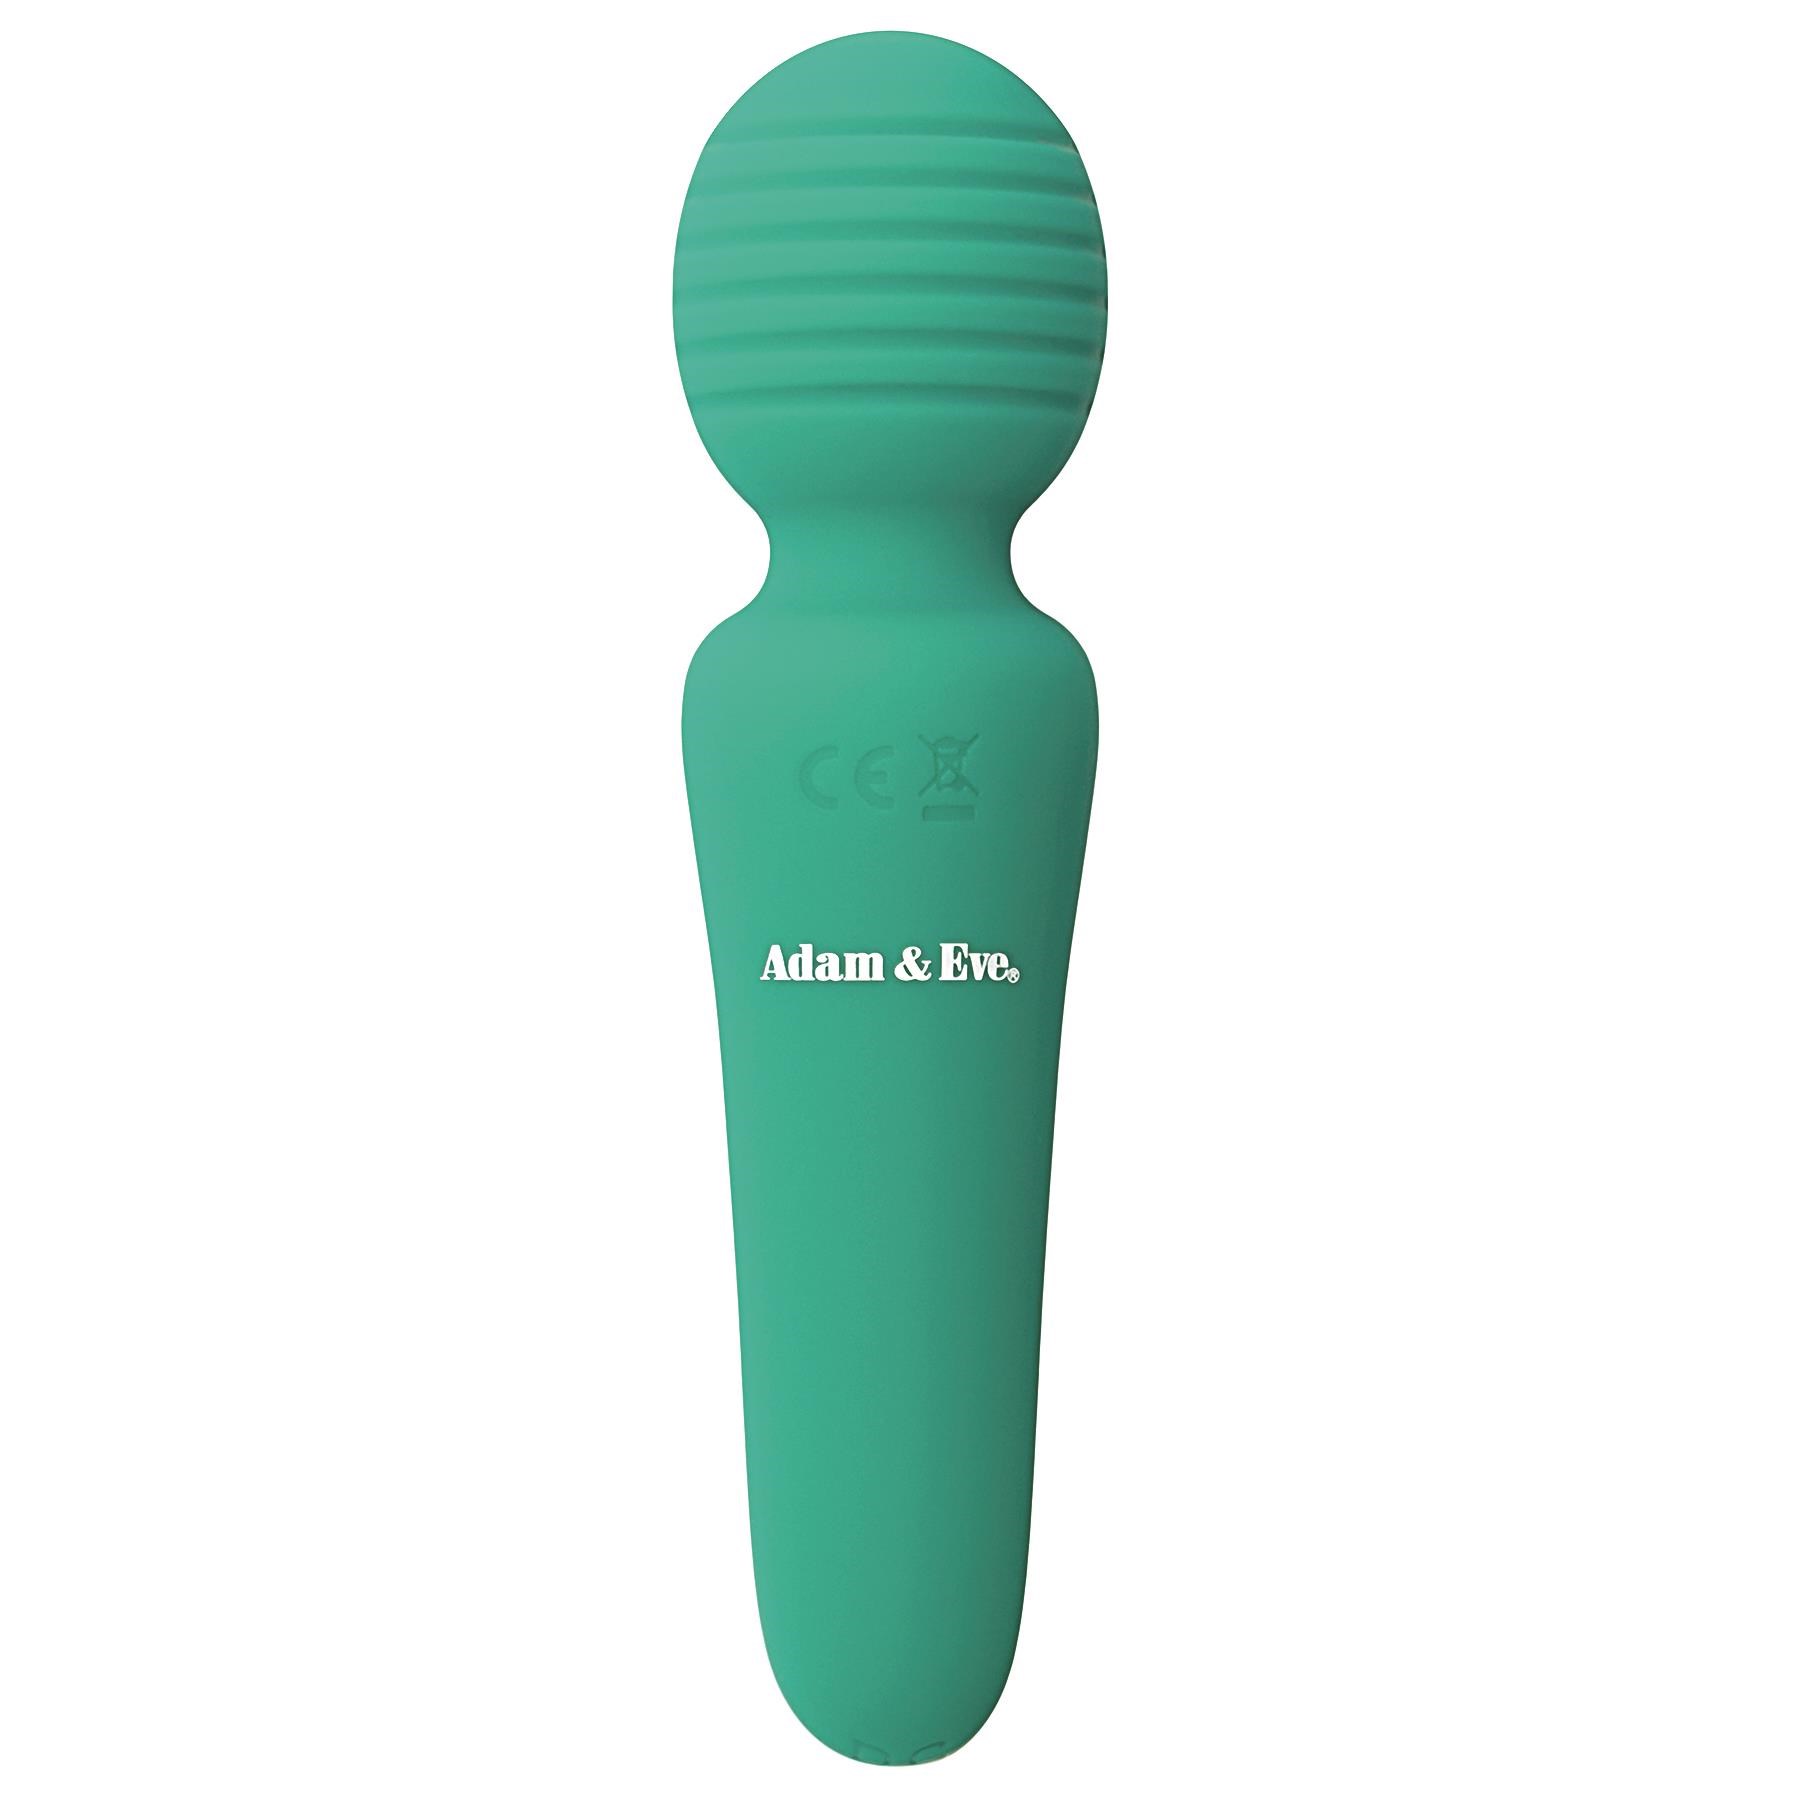 Eve's Petite Private Pleasure Wand - by Adam & Eve - Product Shot